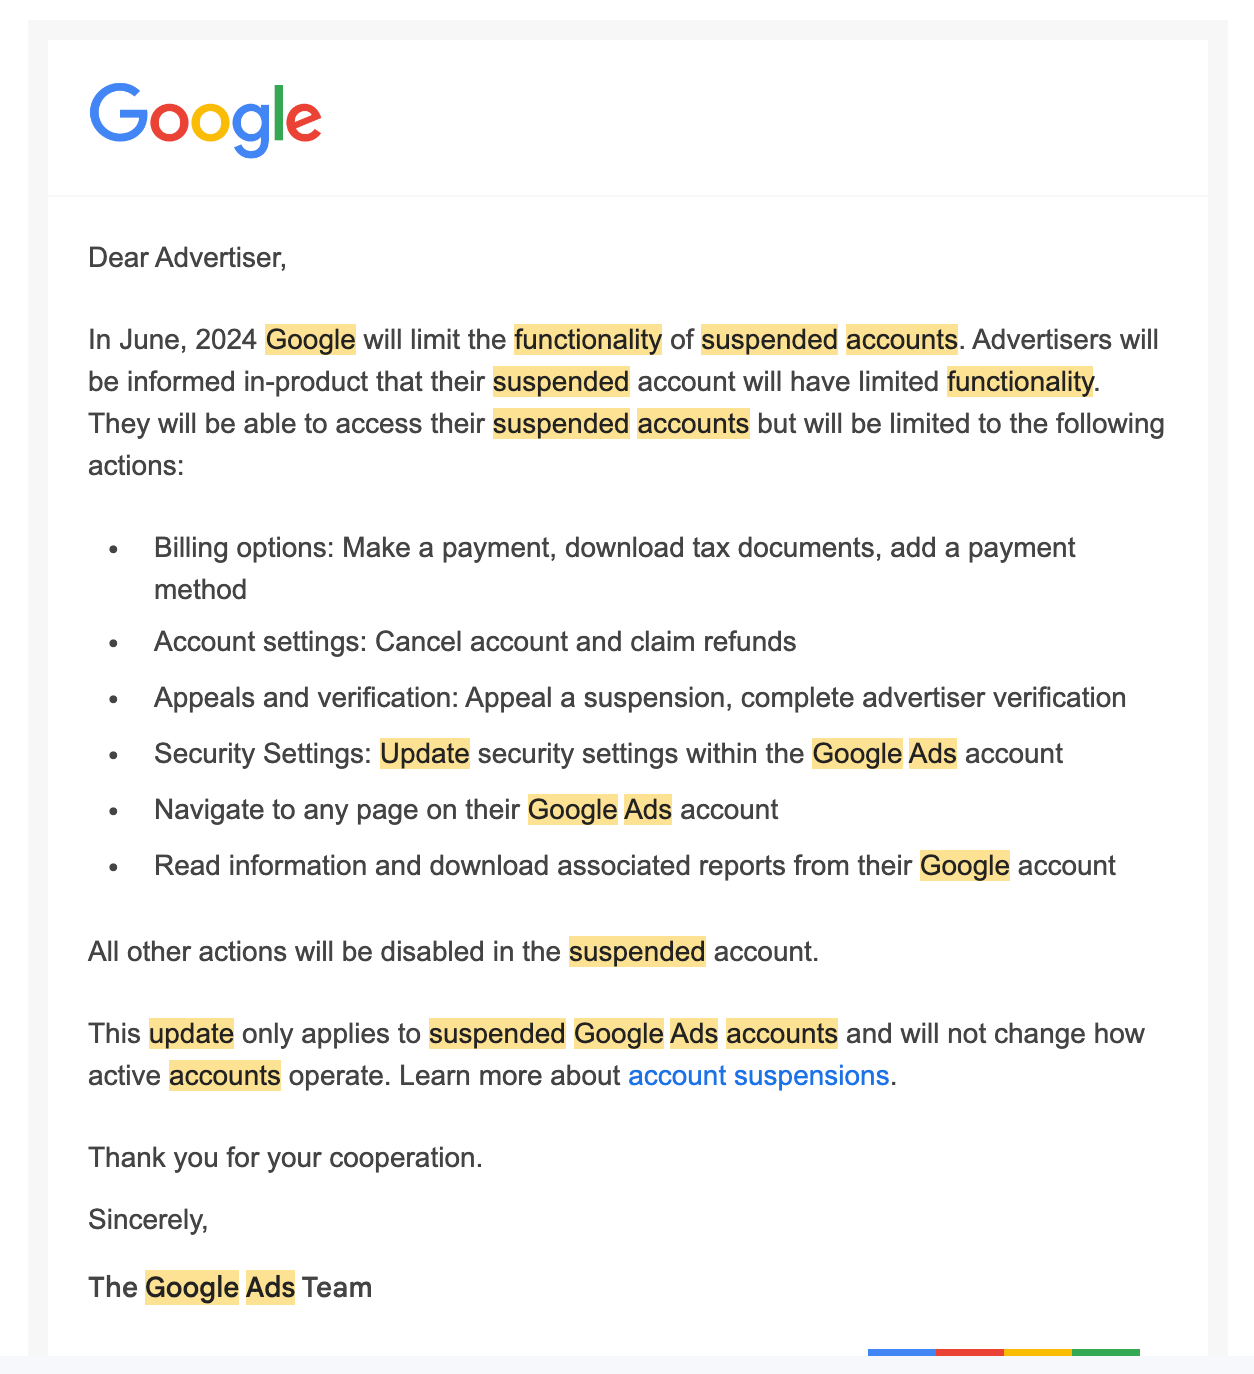 Email Explainer: Update to functionality of suspended Google Ads accounts